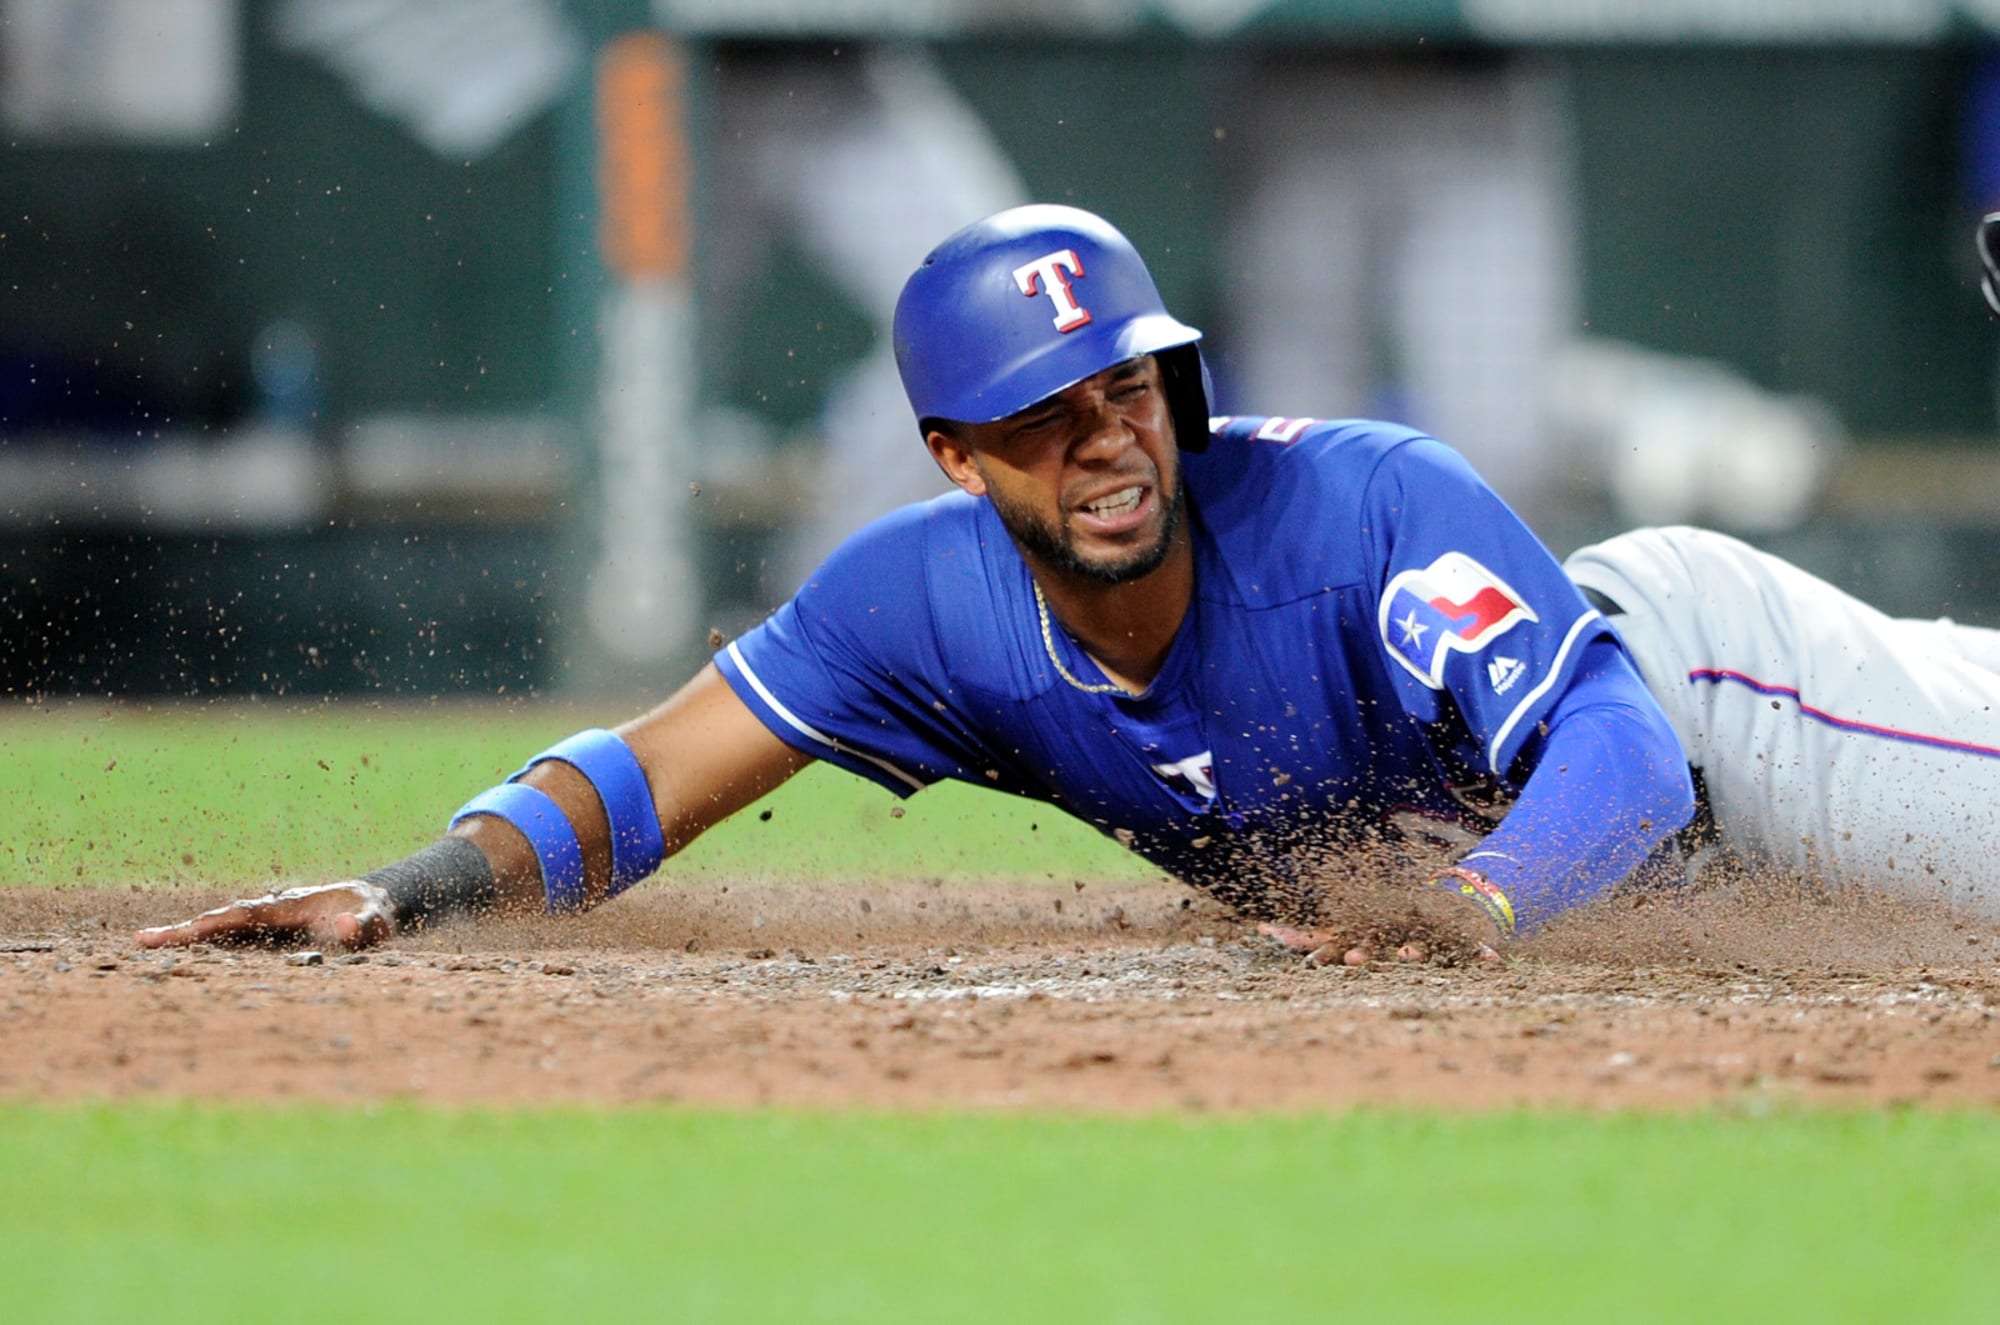 What Is The Texas Rangers Next Step This Offseason?